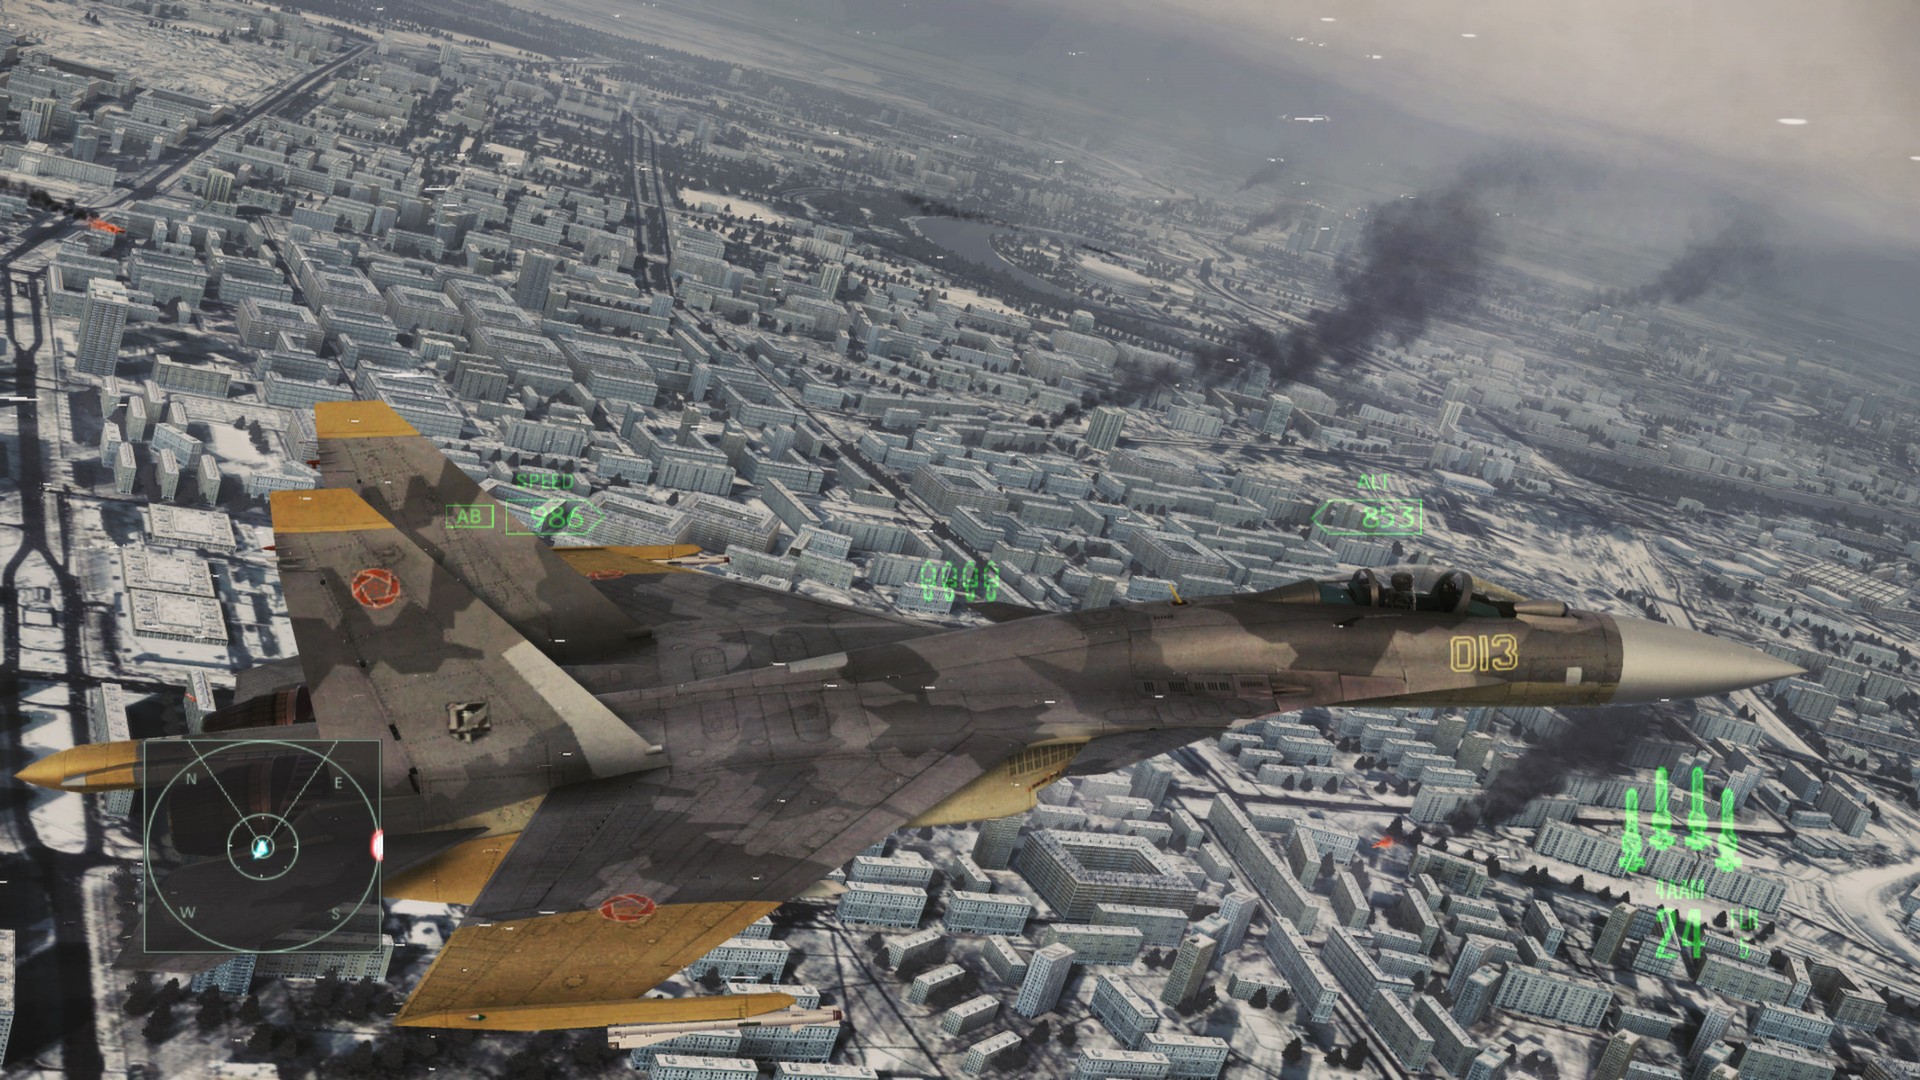 download ace combat 7 for android